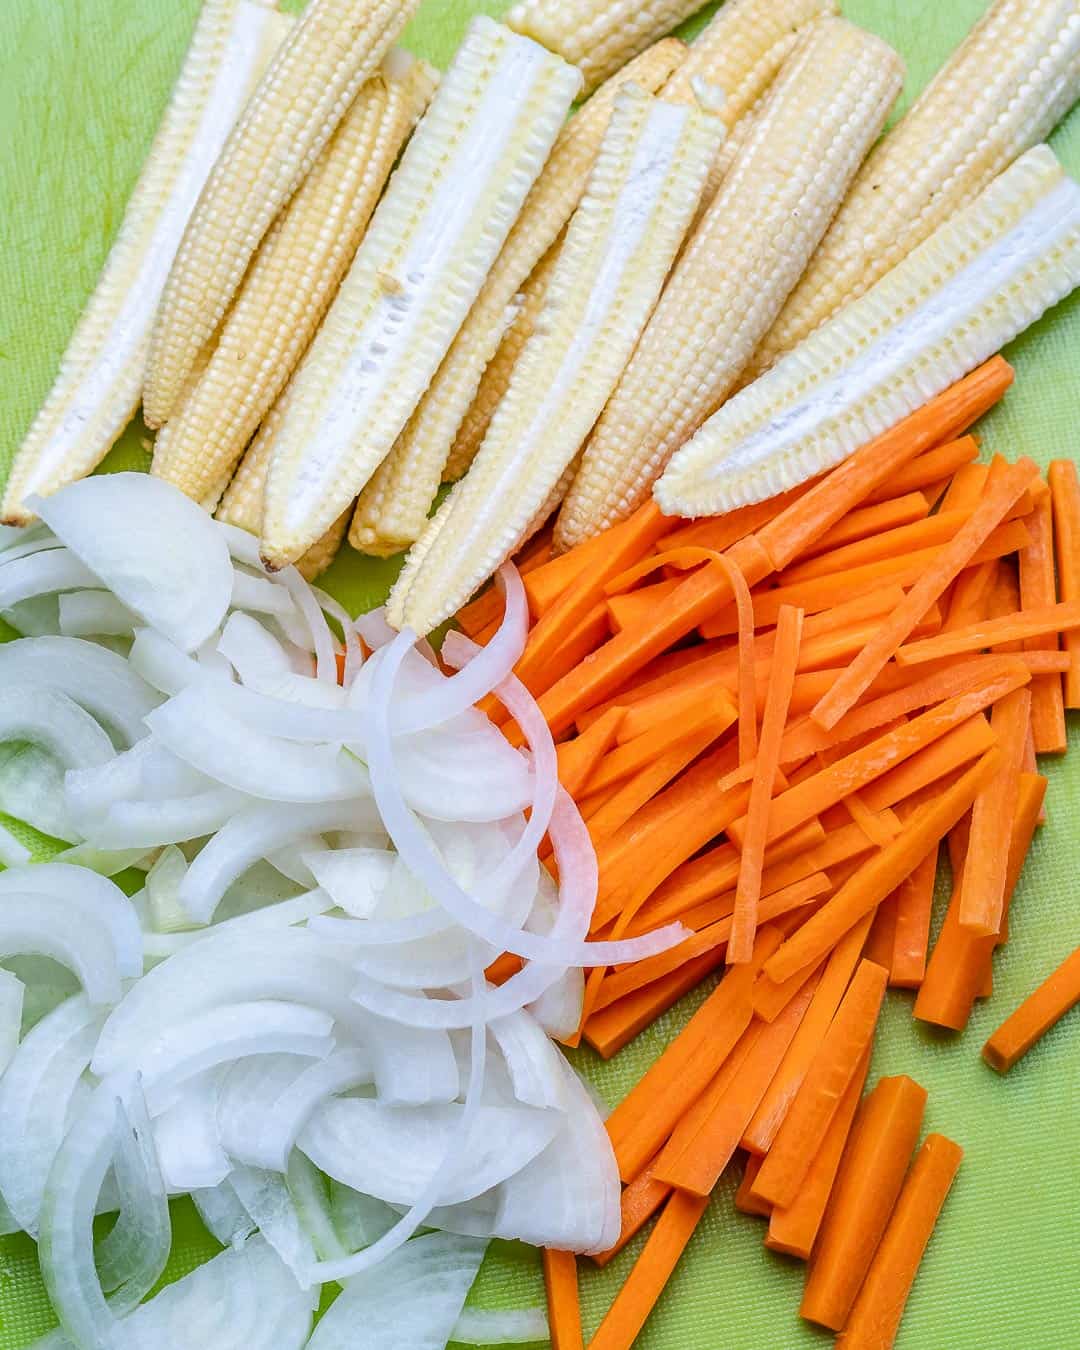 Carrots, onions, and baby corn on cutting board